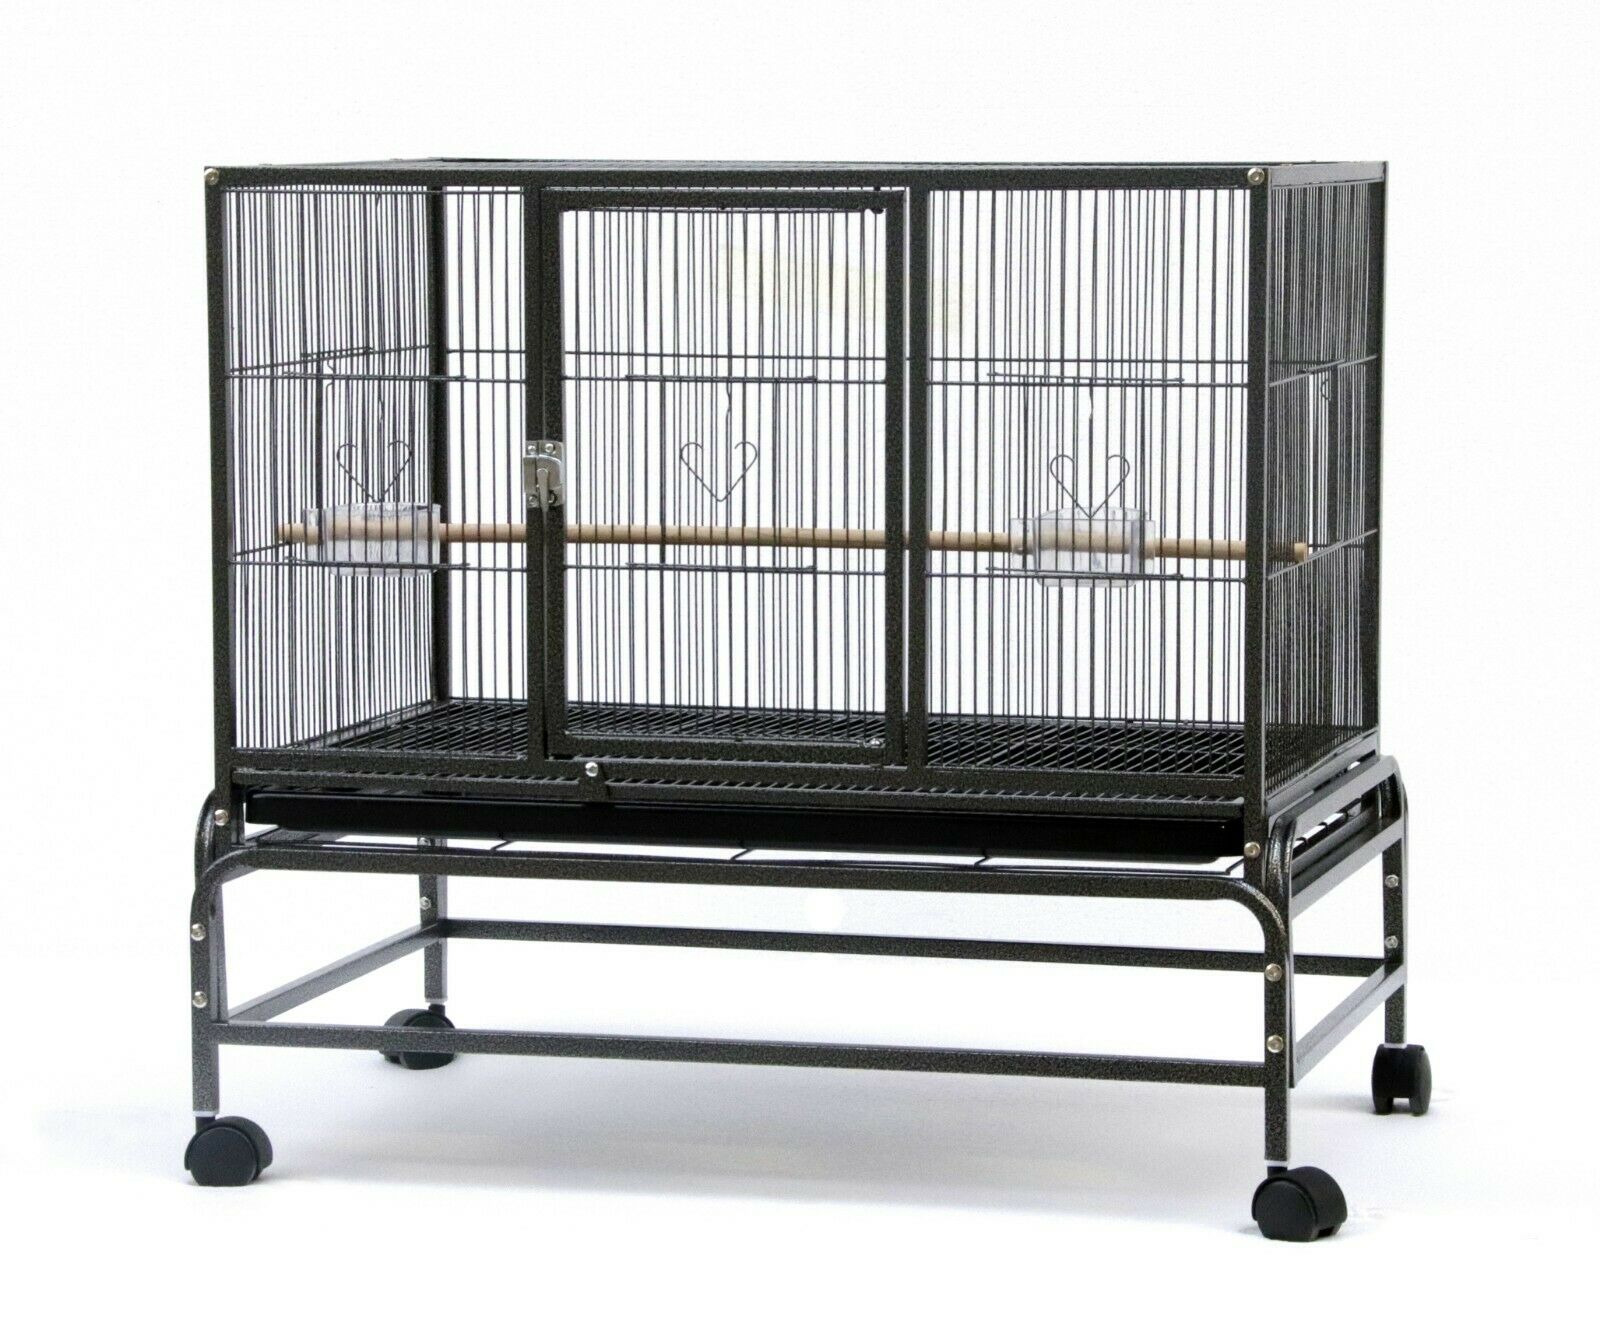 Triple Stackers Breeding Bird Cage Parrot Cage Aviary 180cm A303 Budtrol 